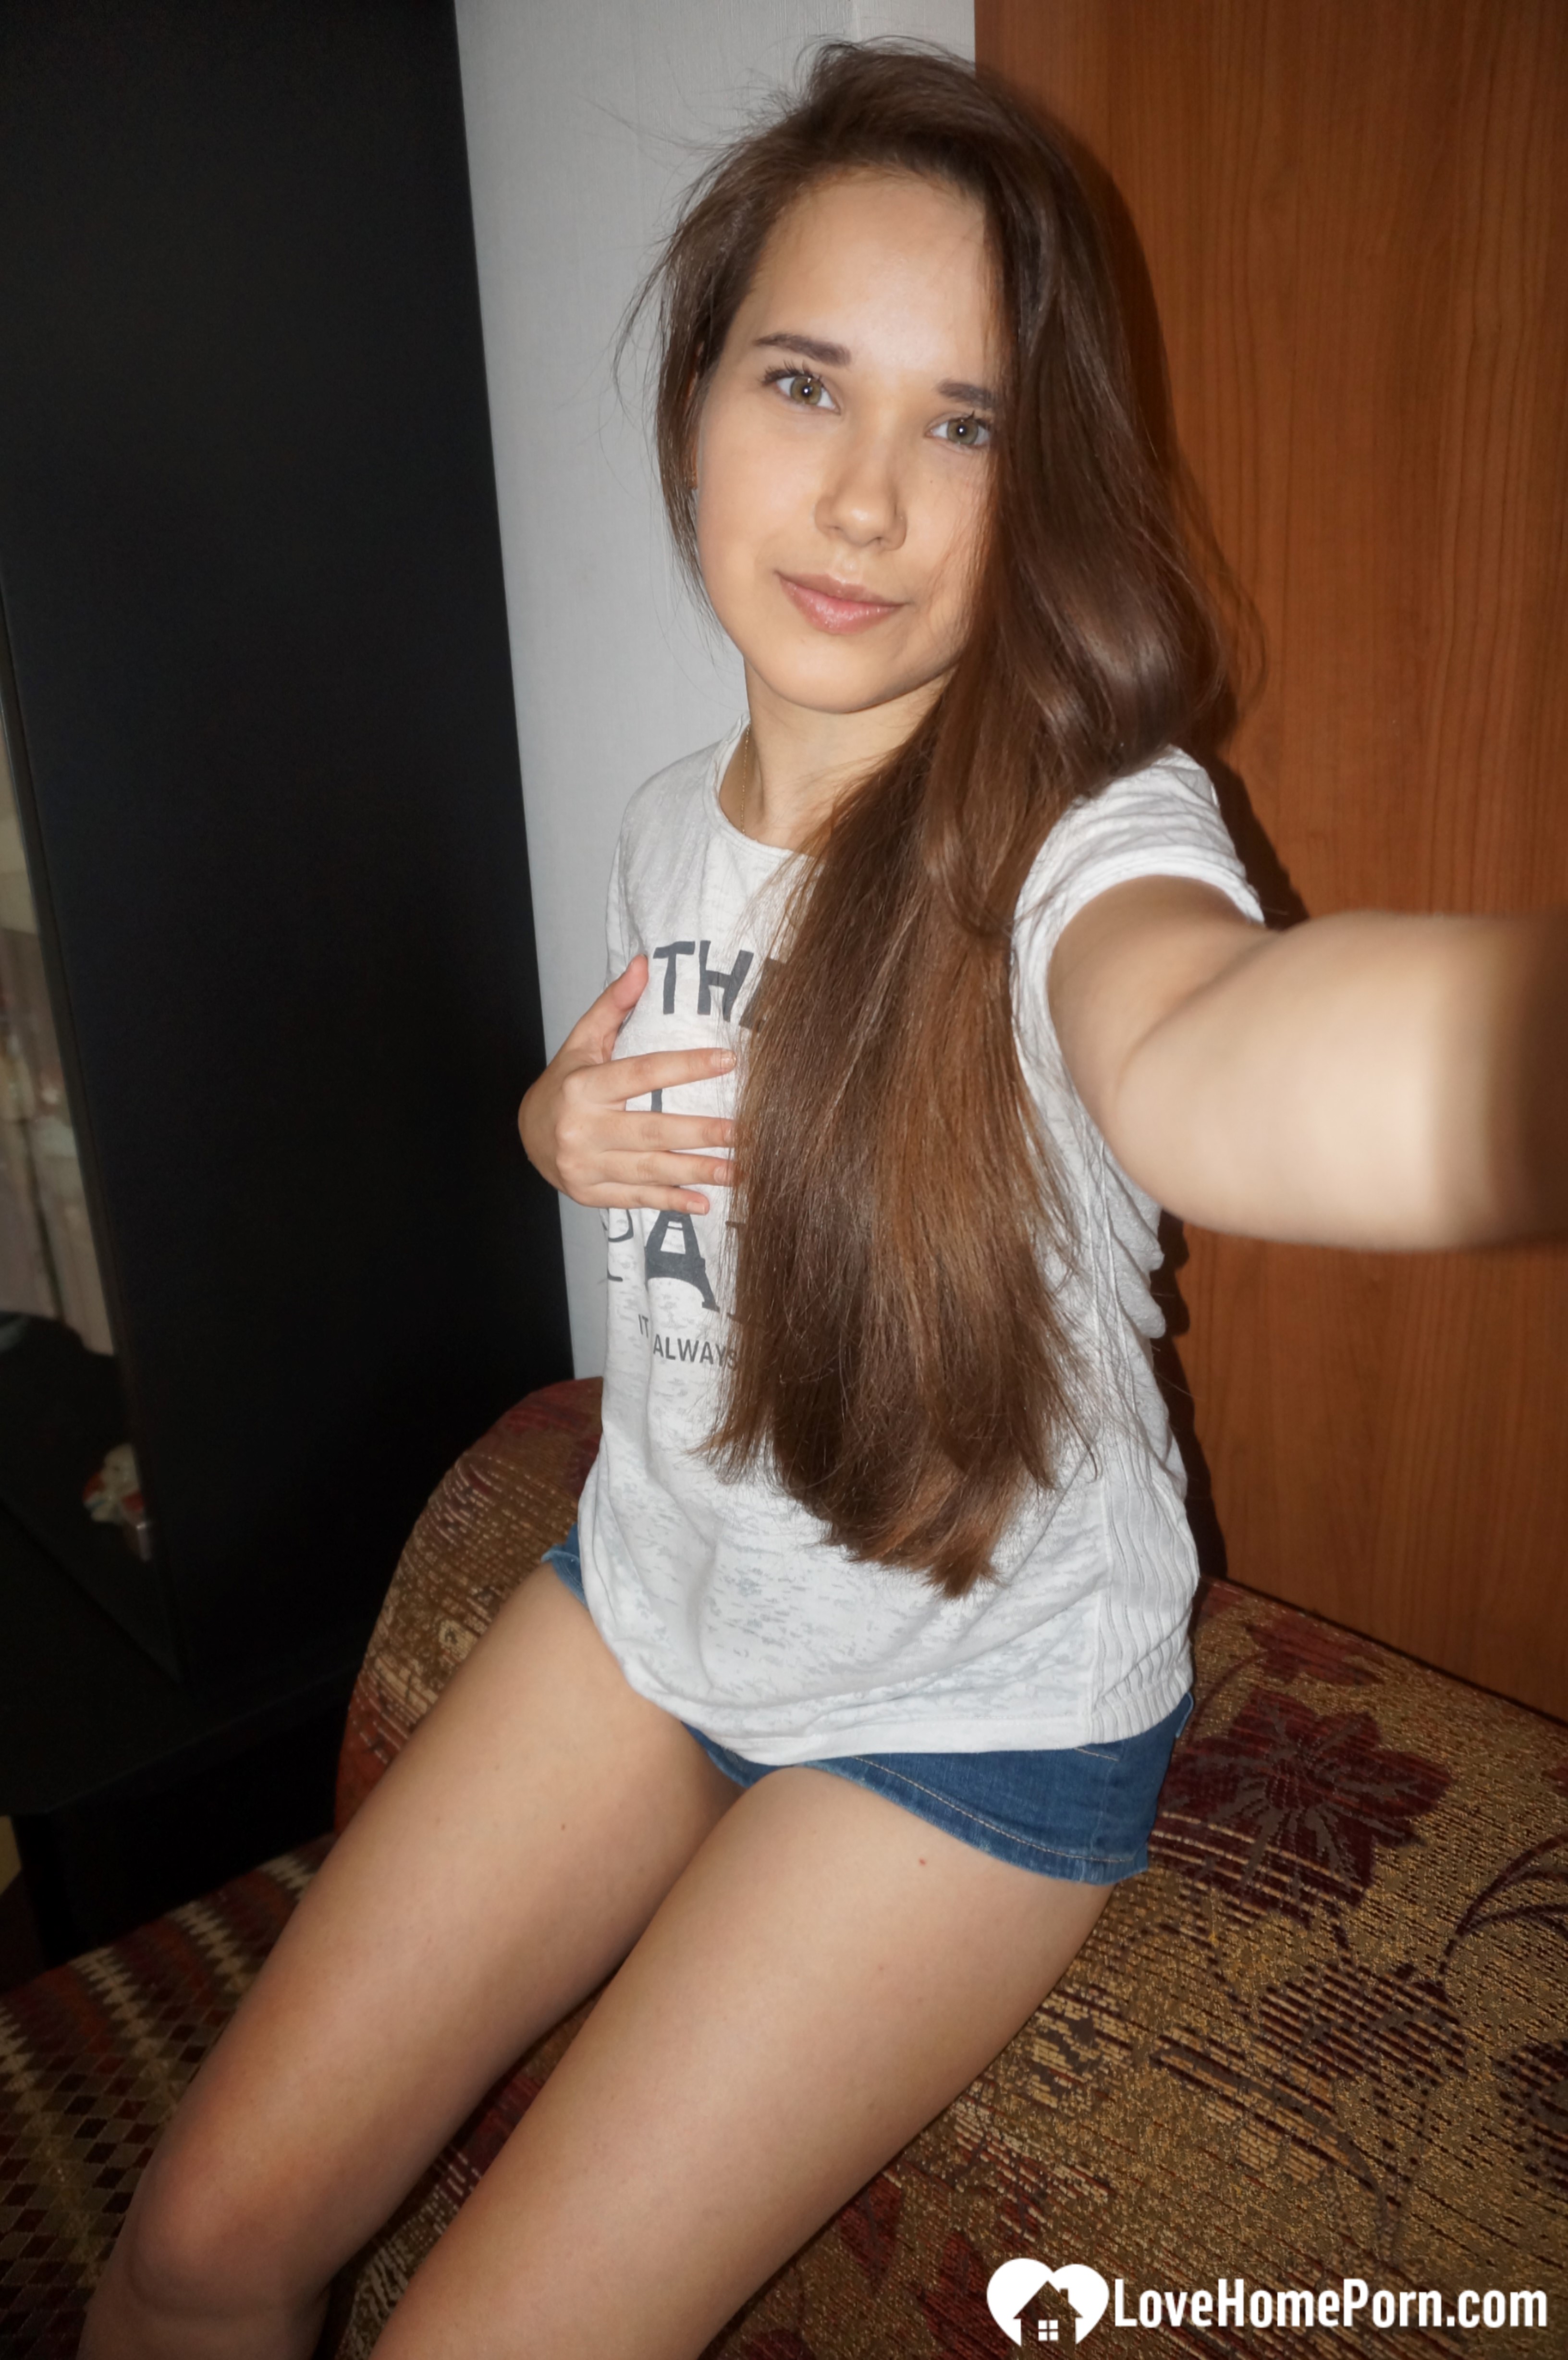 Long-haired teen loves to pose and take nudes